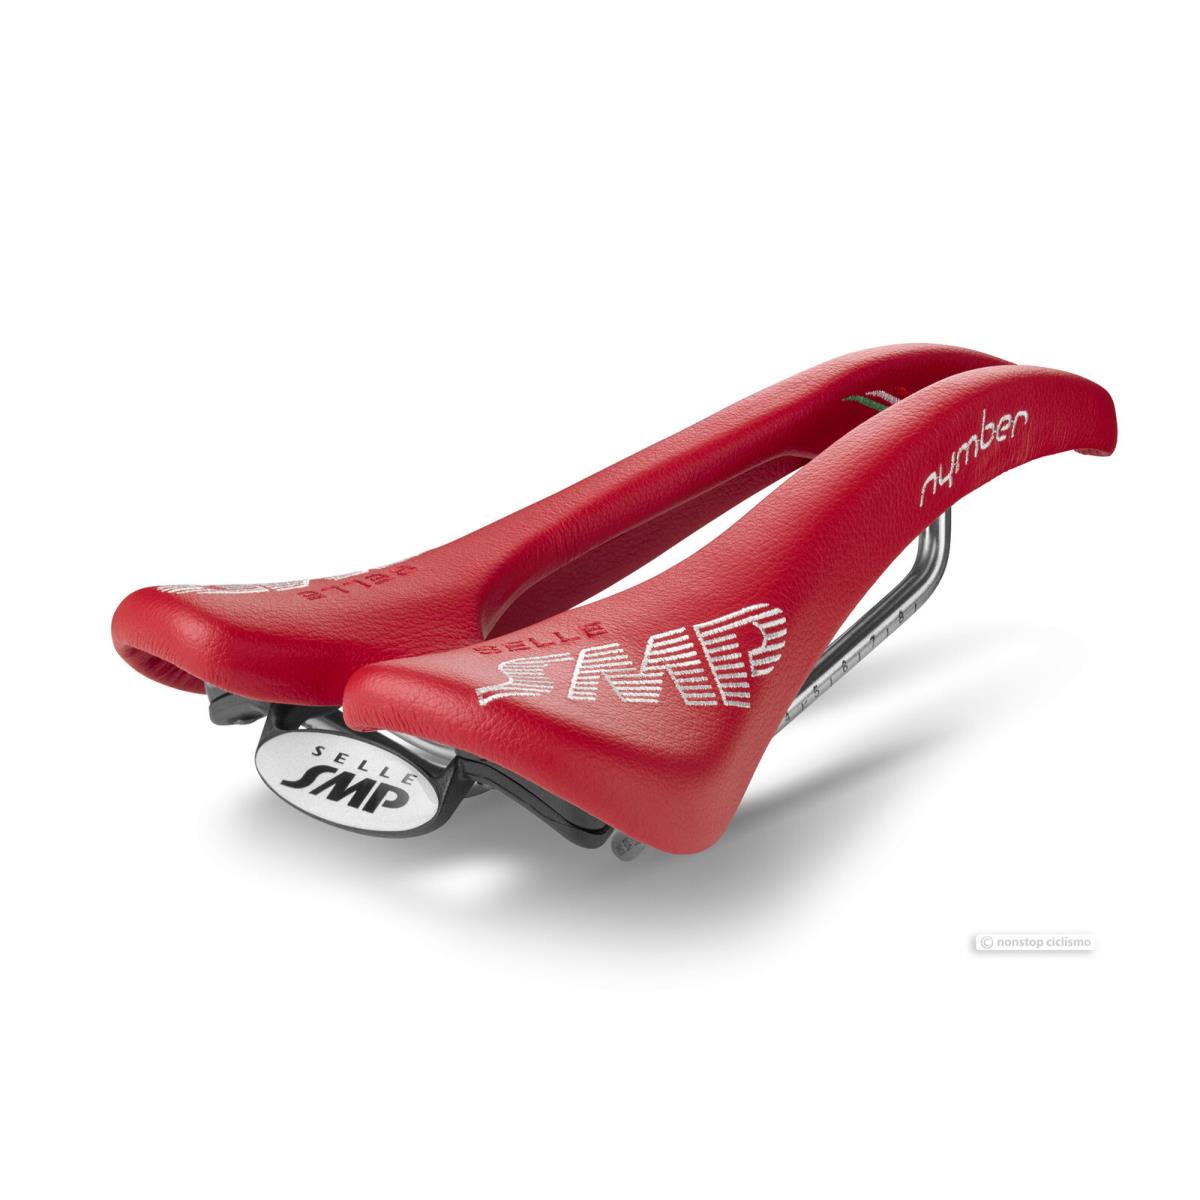 Selle Smp Nymber Saddle : Red - Made IN Italy - Red